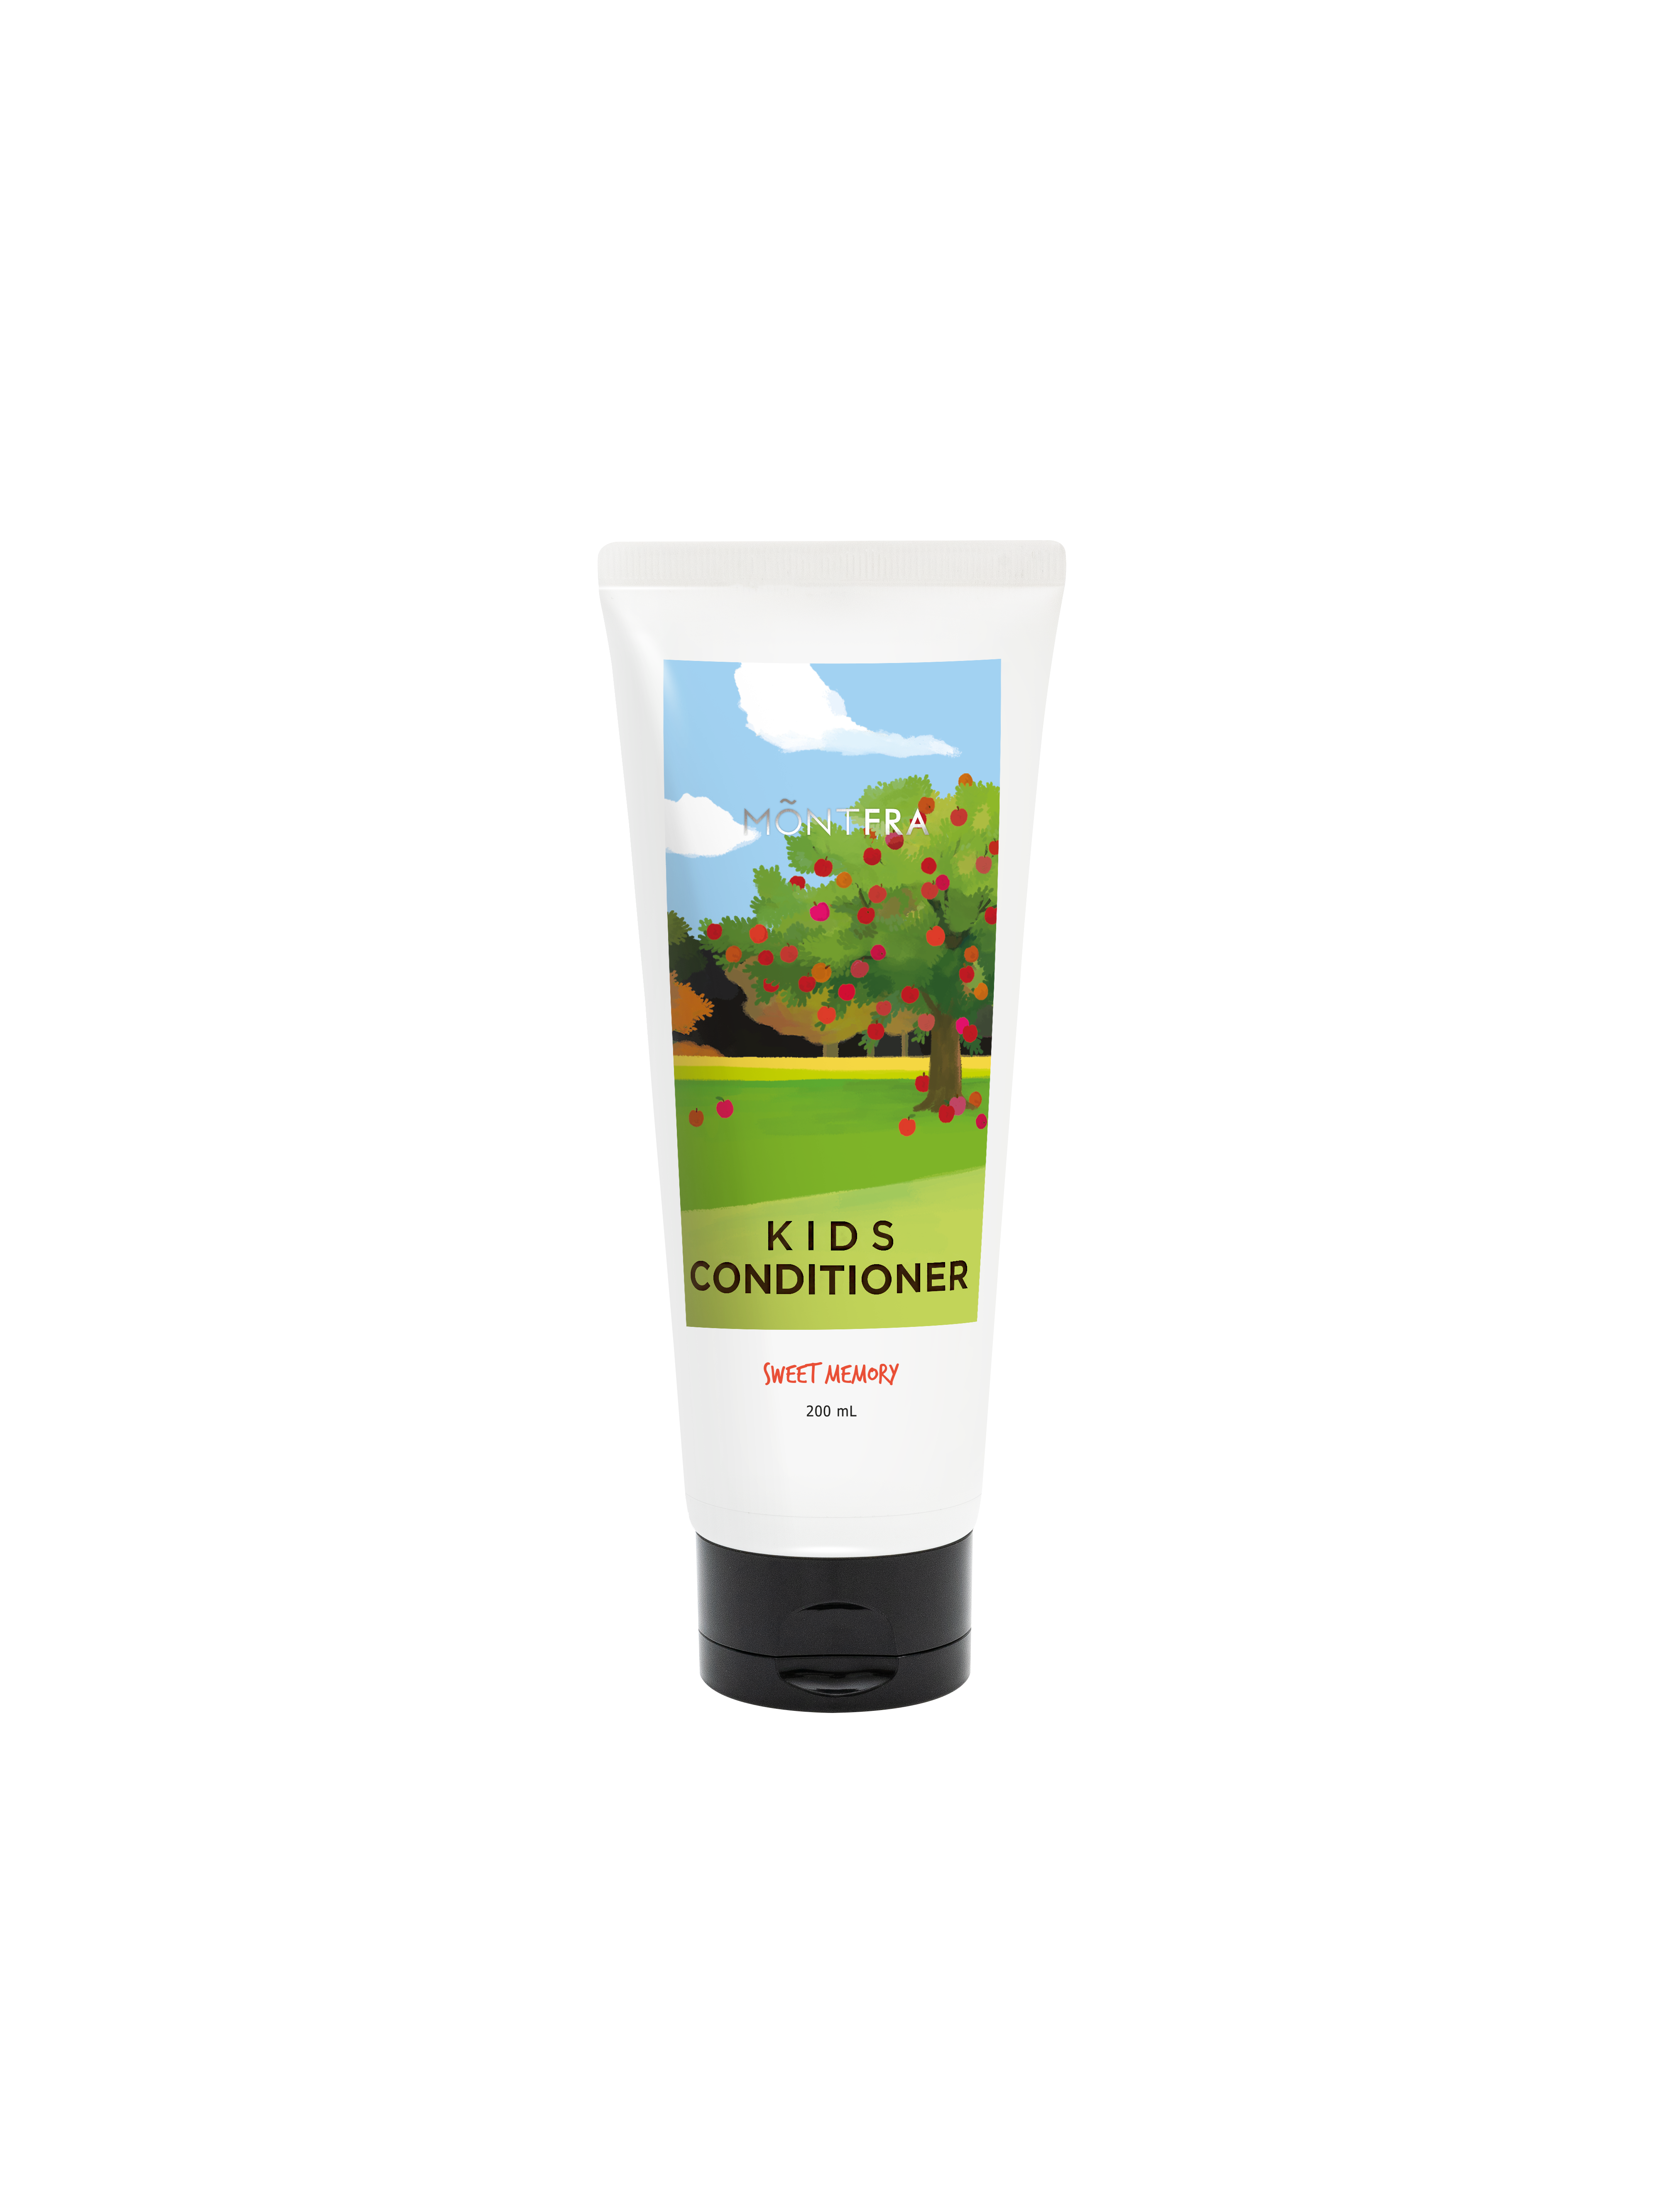 Montfra_Kids_ Conditioner Sweet Memory  200ml